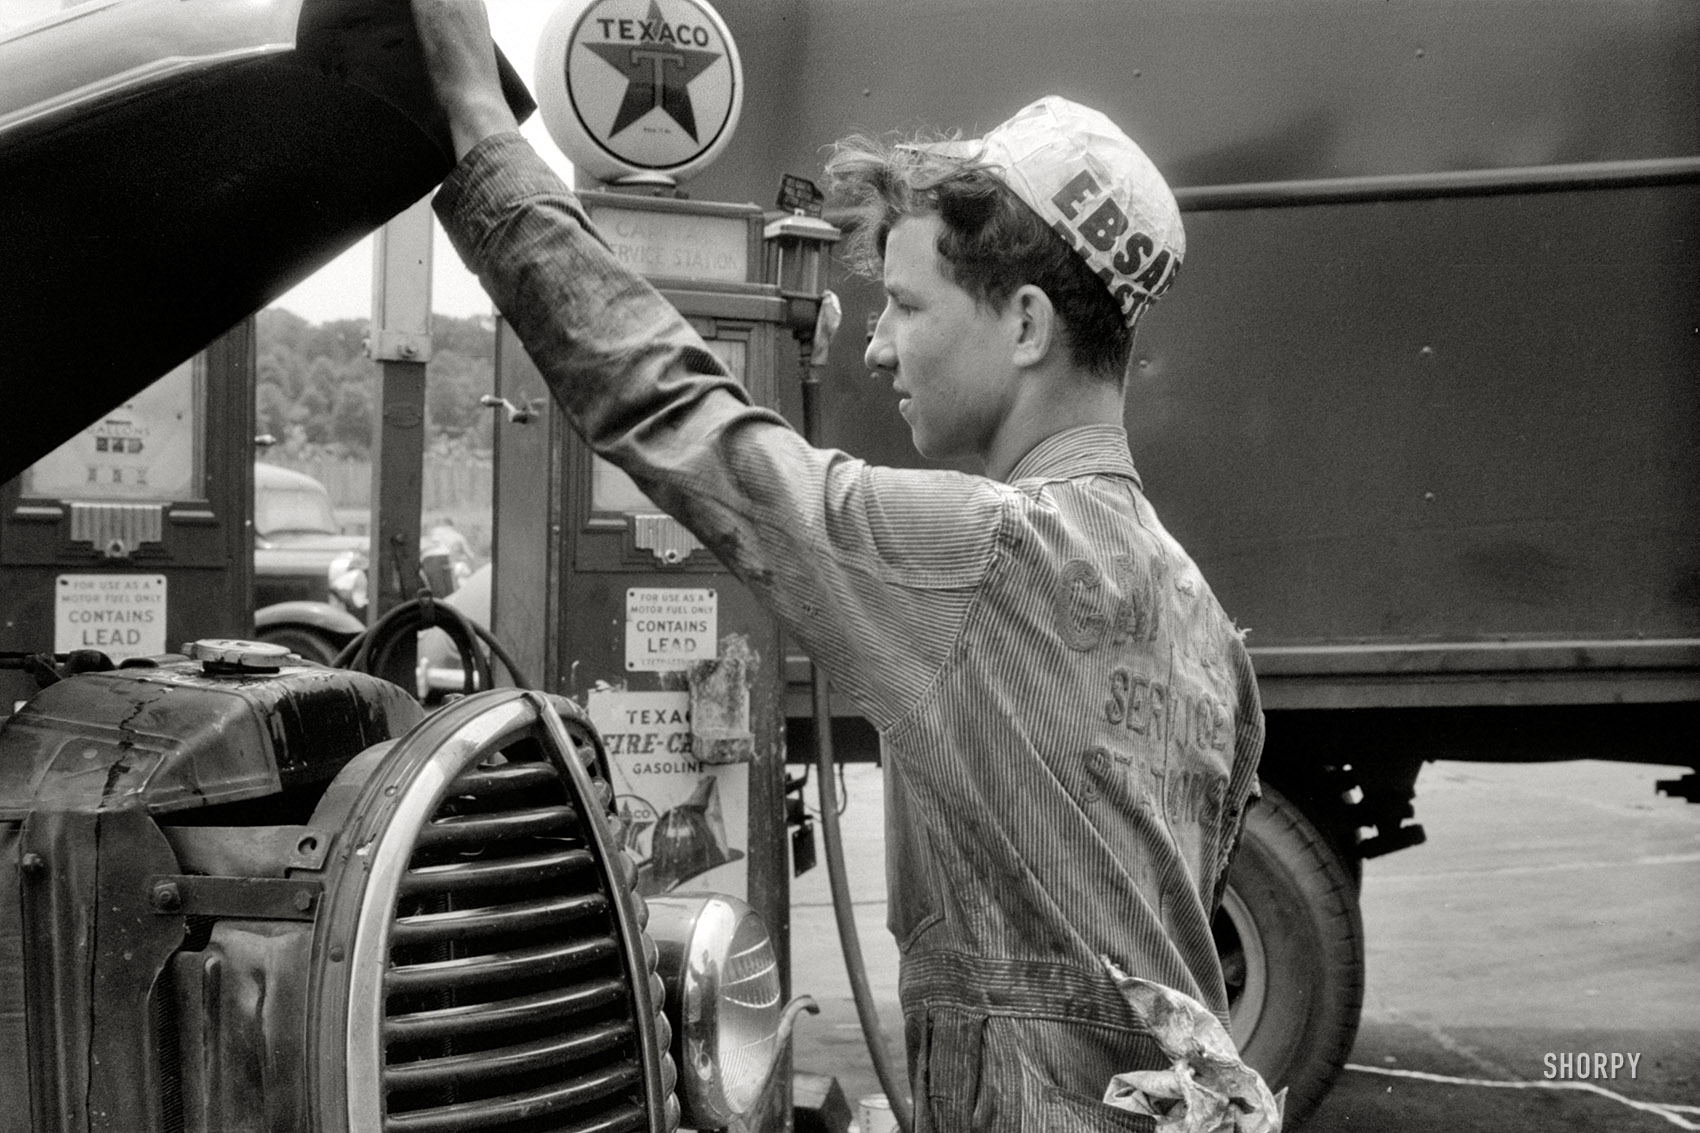 June 1940. Washington, D.C. "Attendant at truck service station on U.S. 1 (New York Avenue)." 35mm nitrate negative by Jack Delano. View full size.